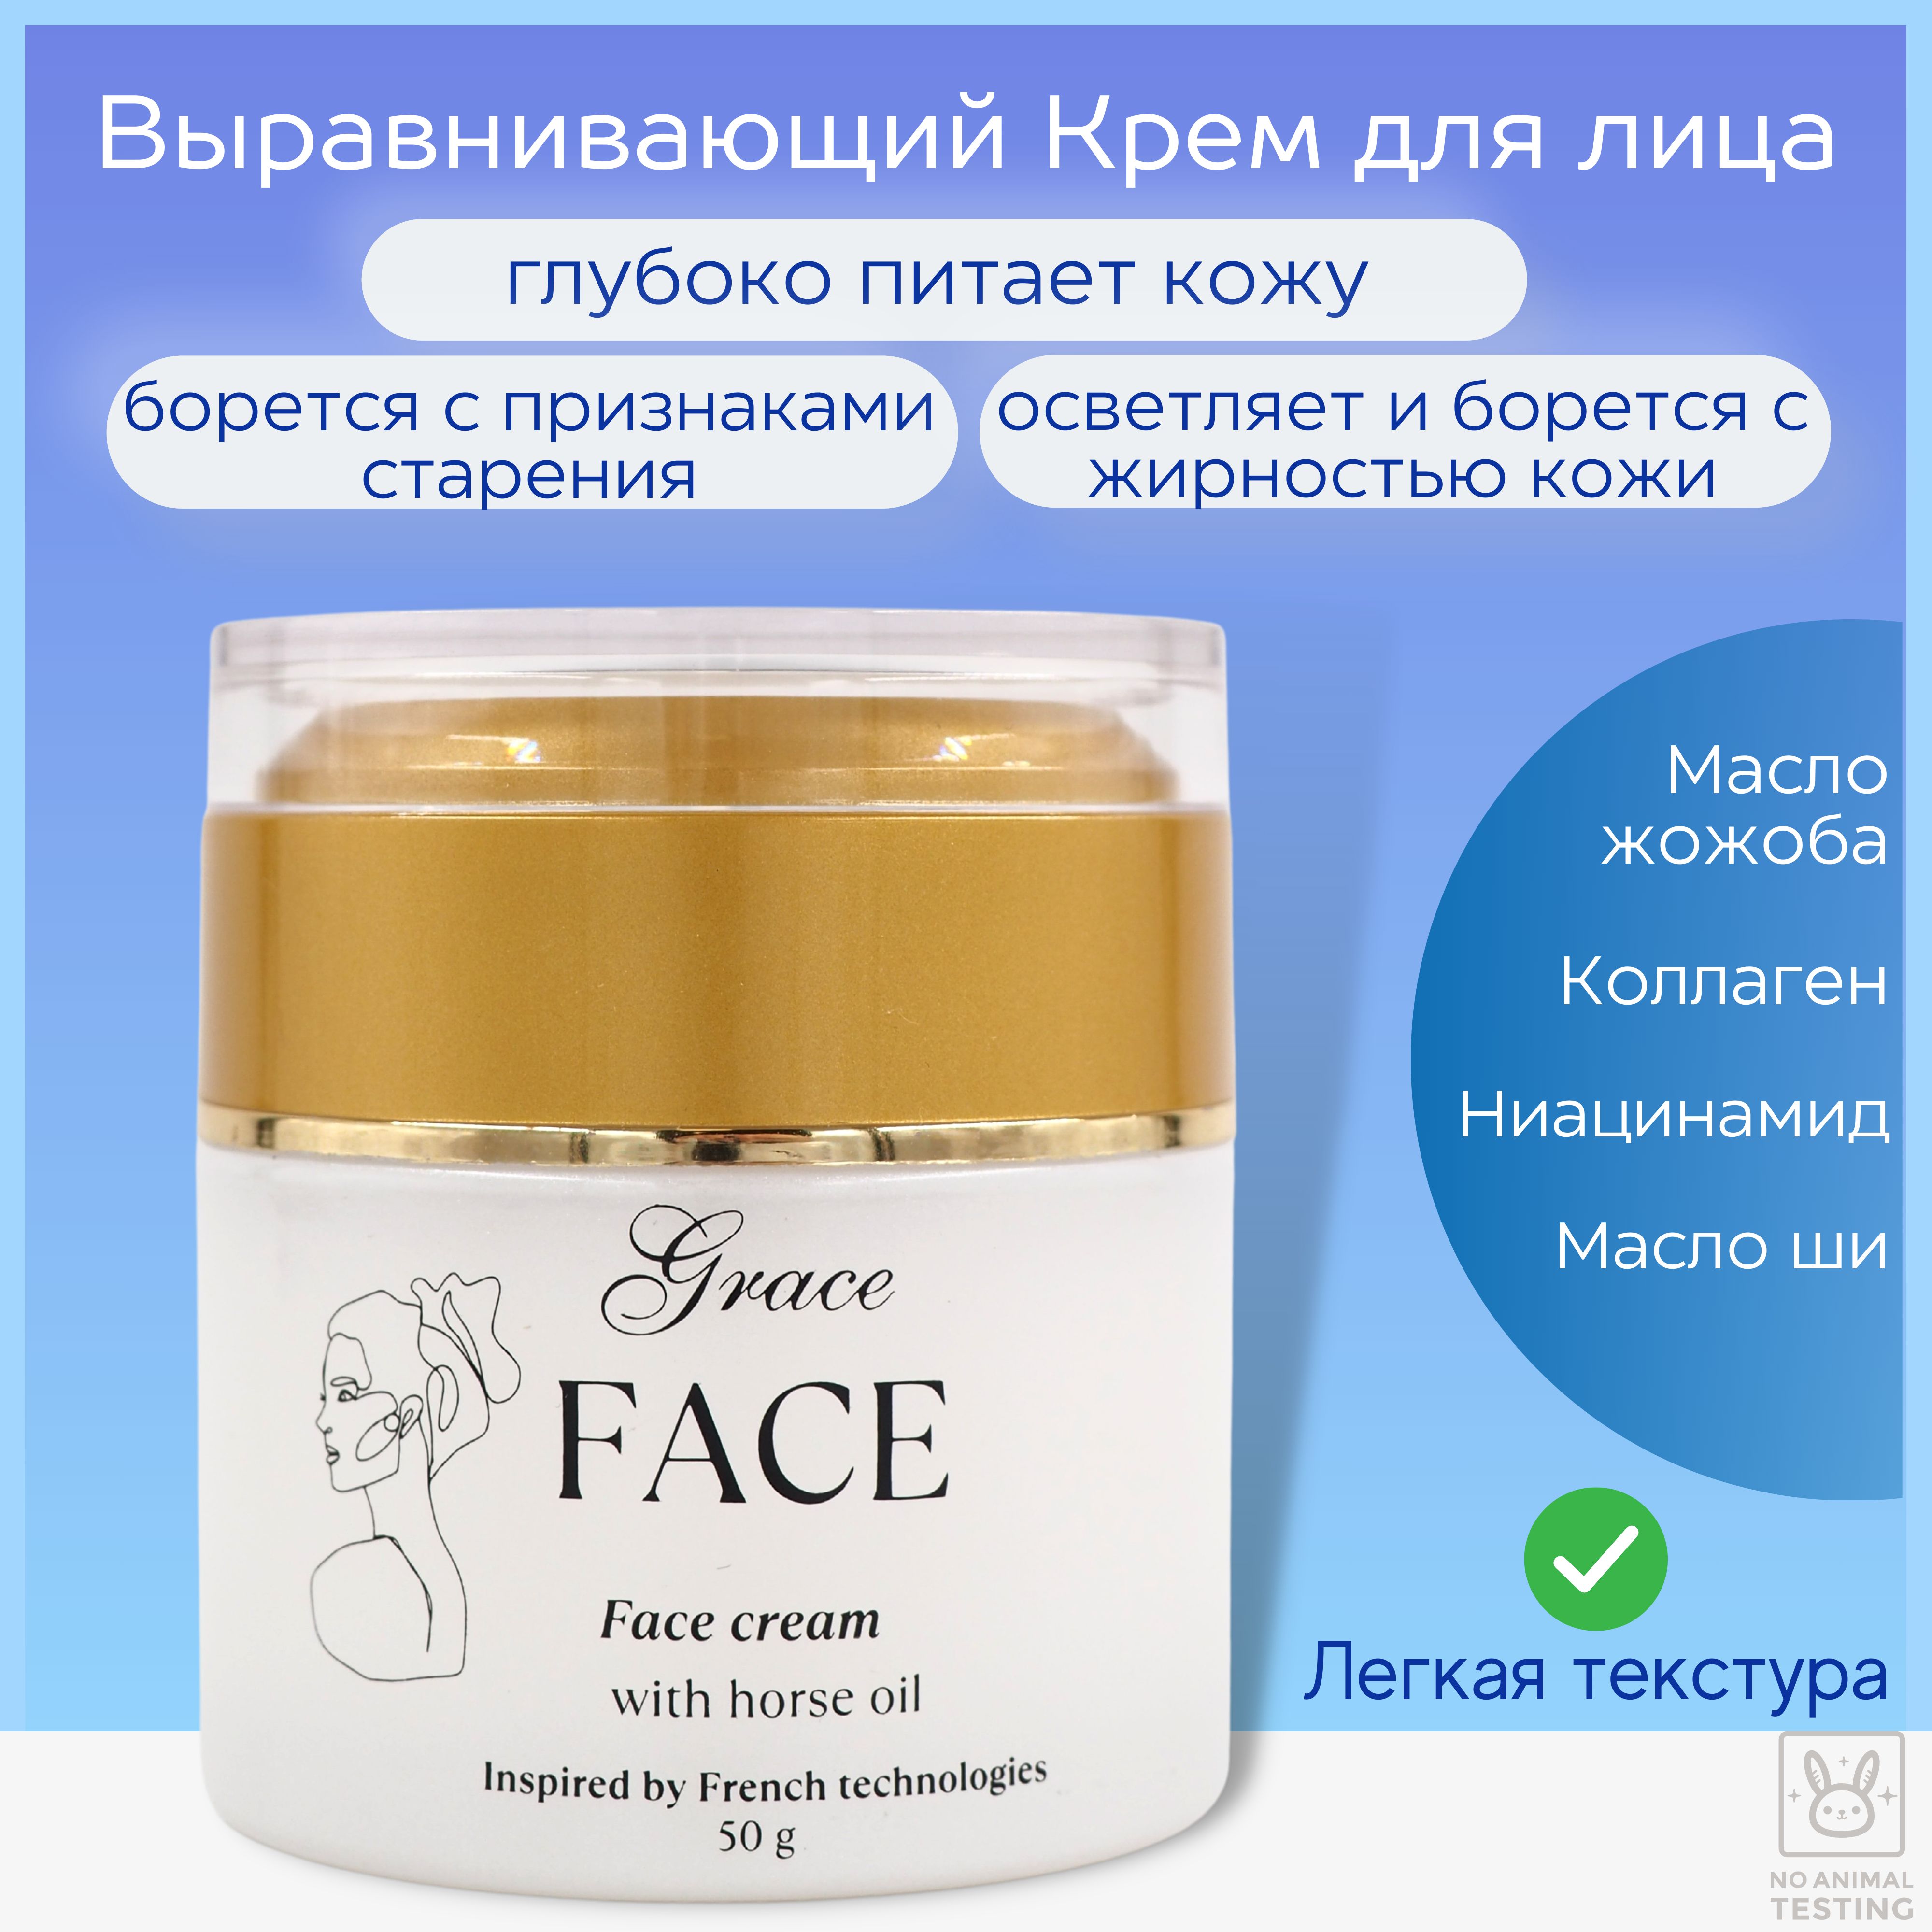 Horse Oil Face Cream Instant Wrinkle Remover Firming Anti Aging Lifting  Moisturizing Facial Cream Remove Fineline Beauty Care